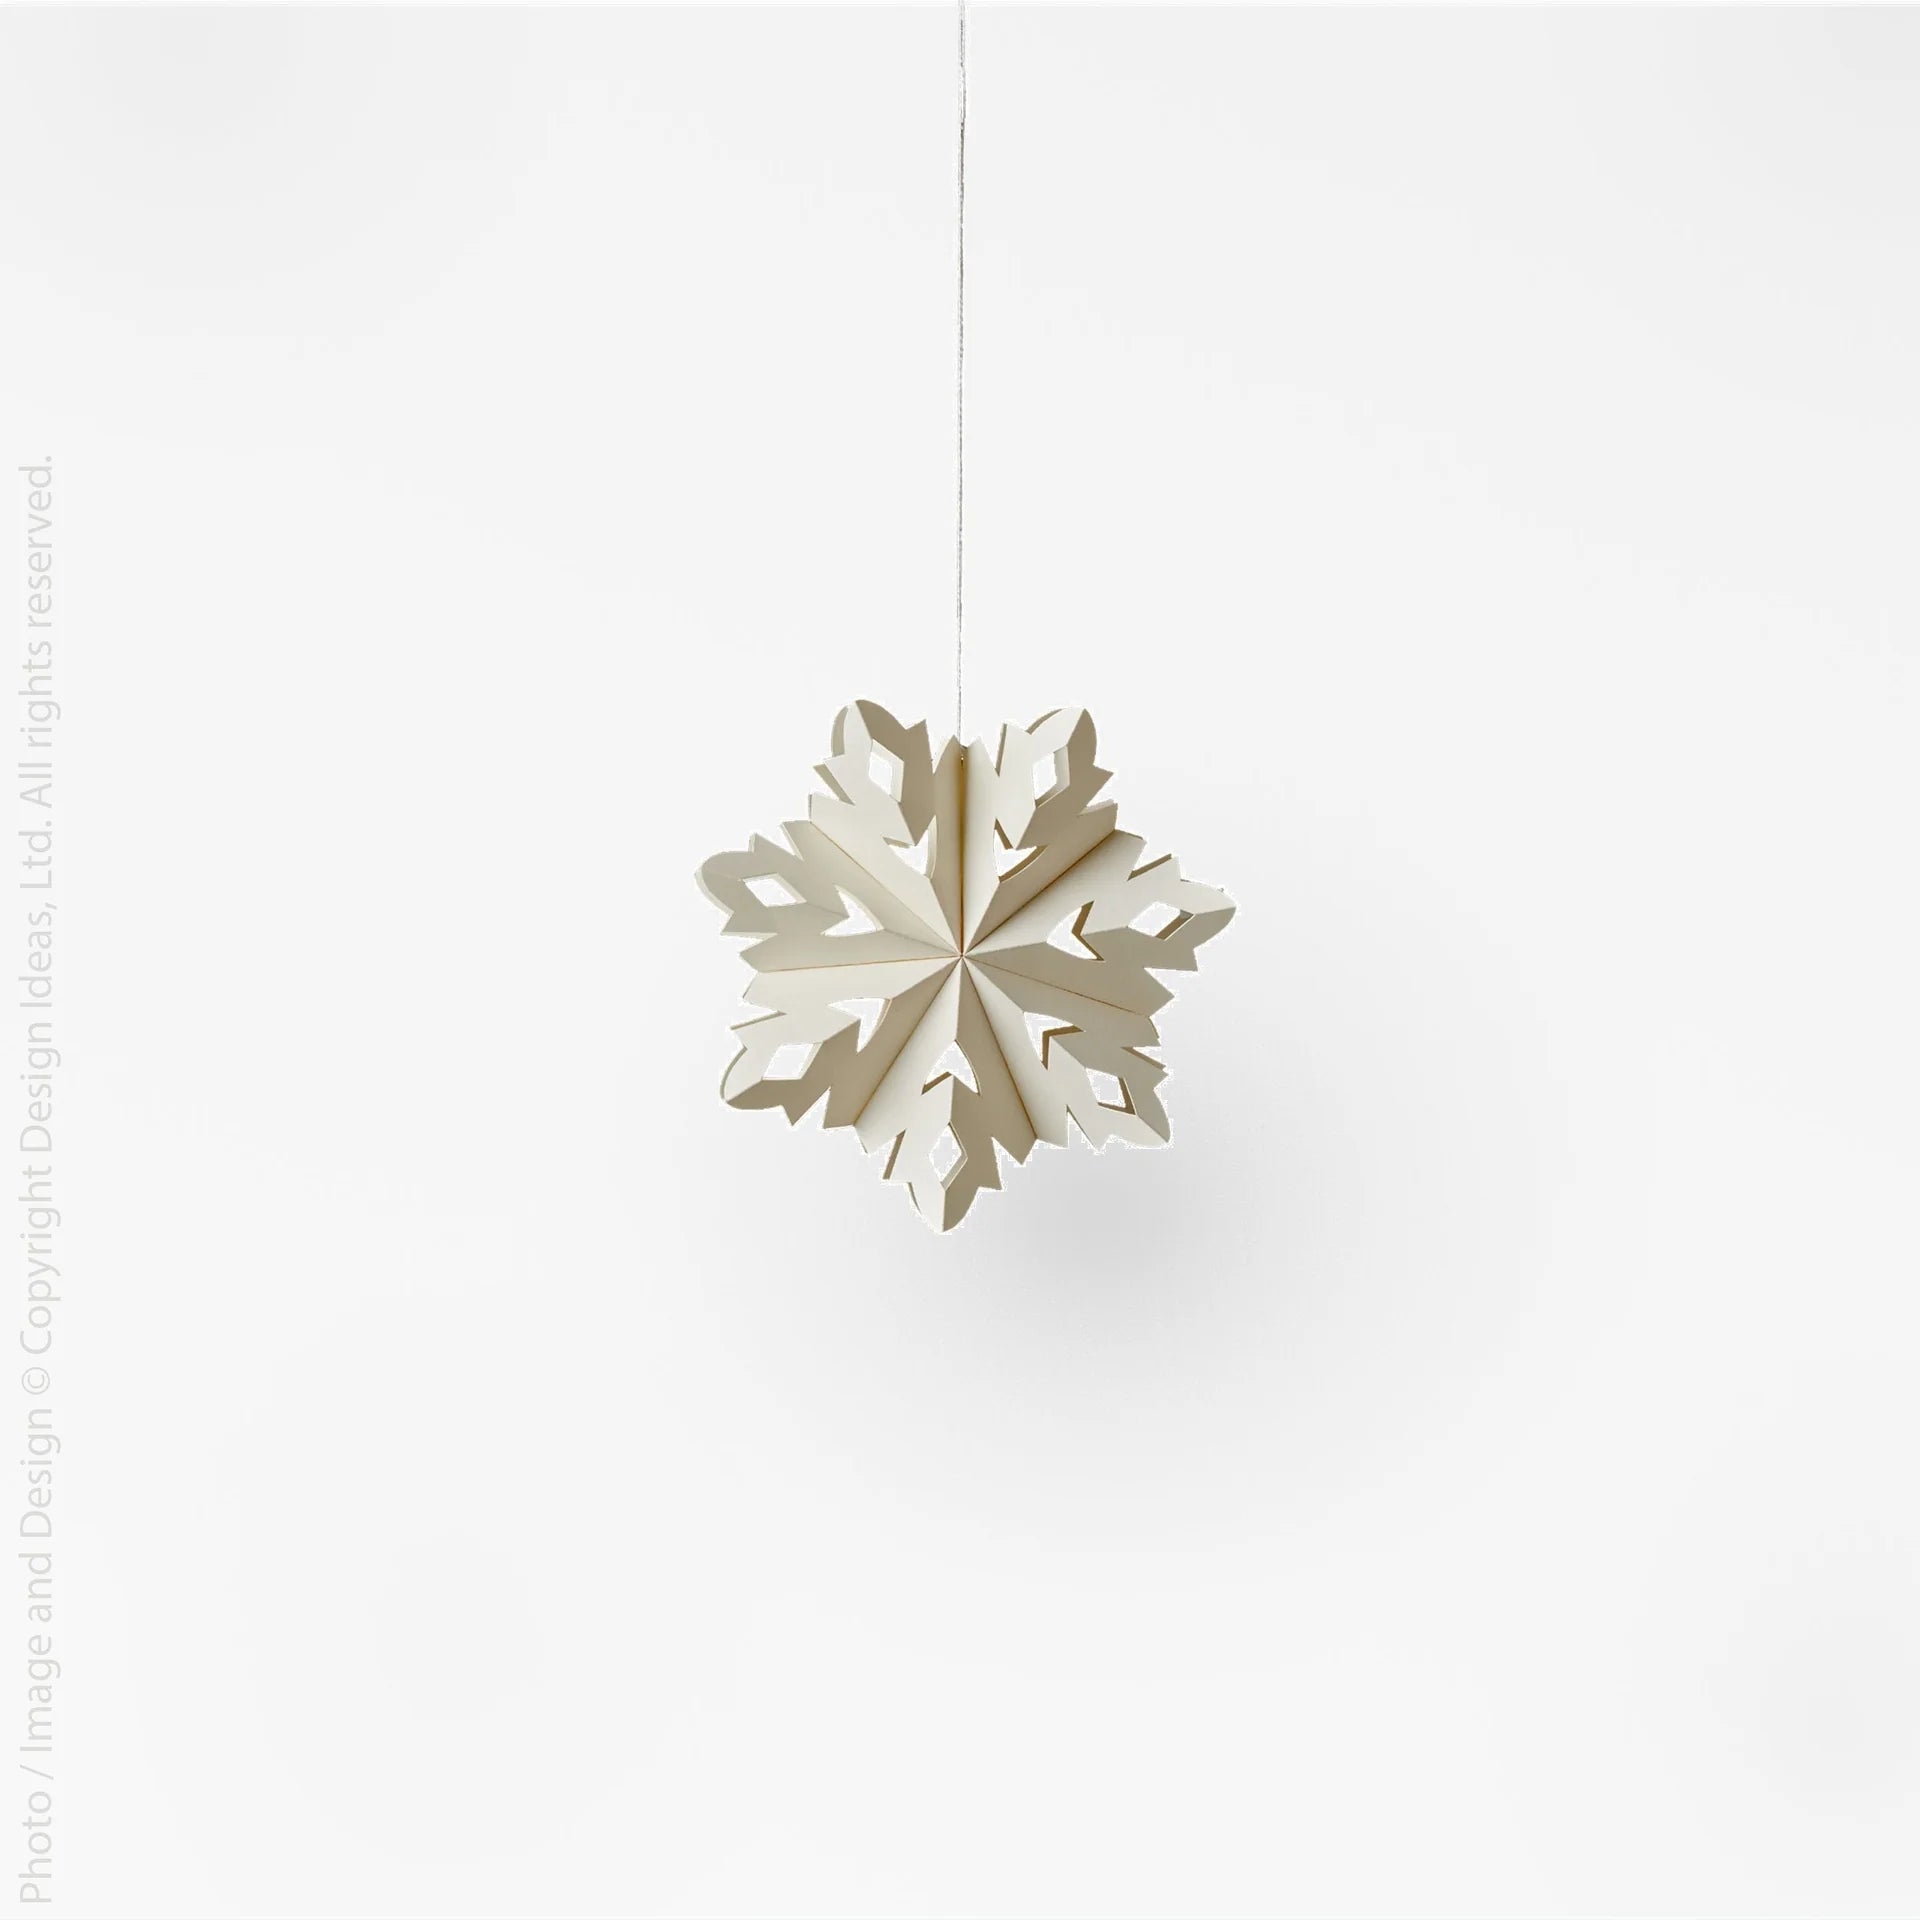 Flurry Paper Snowflakes (Small)